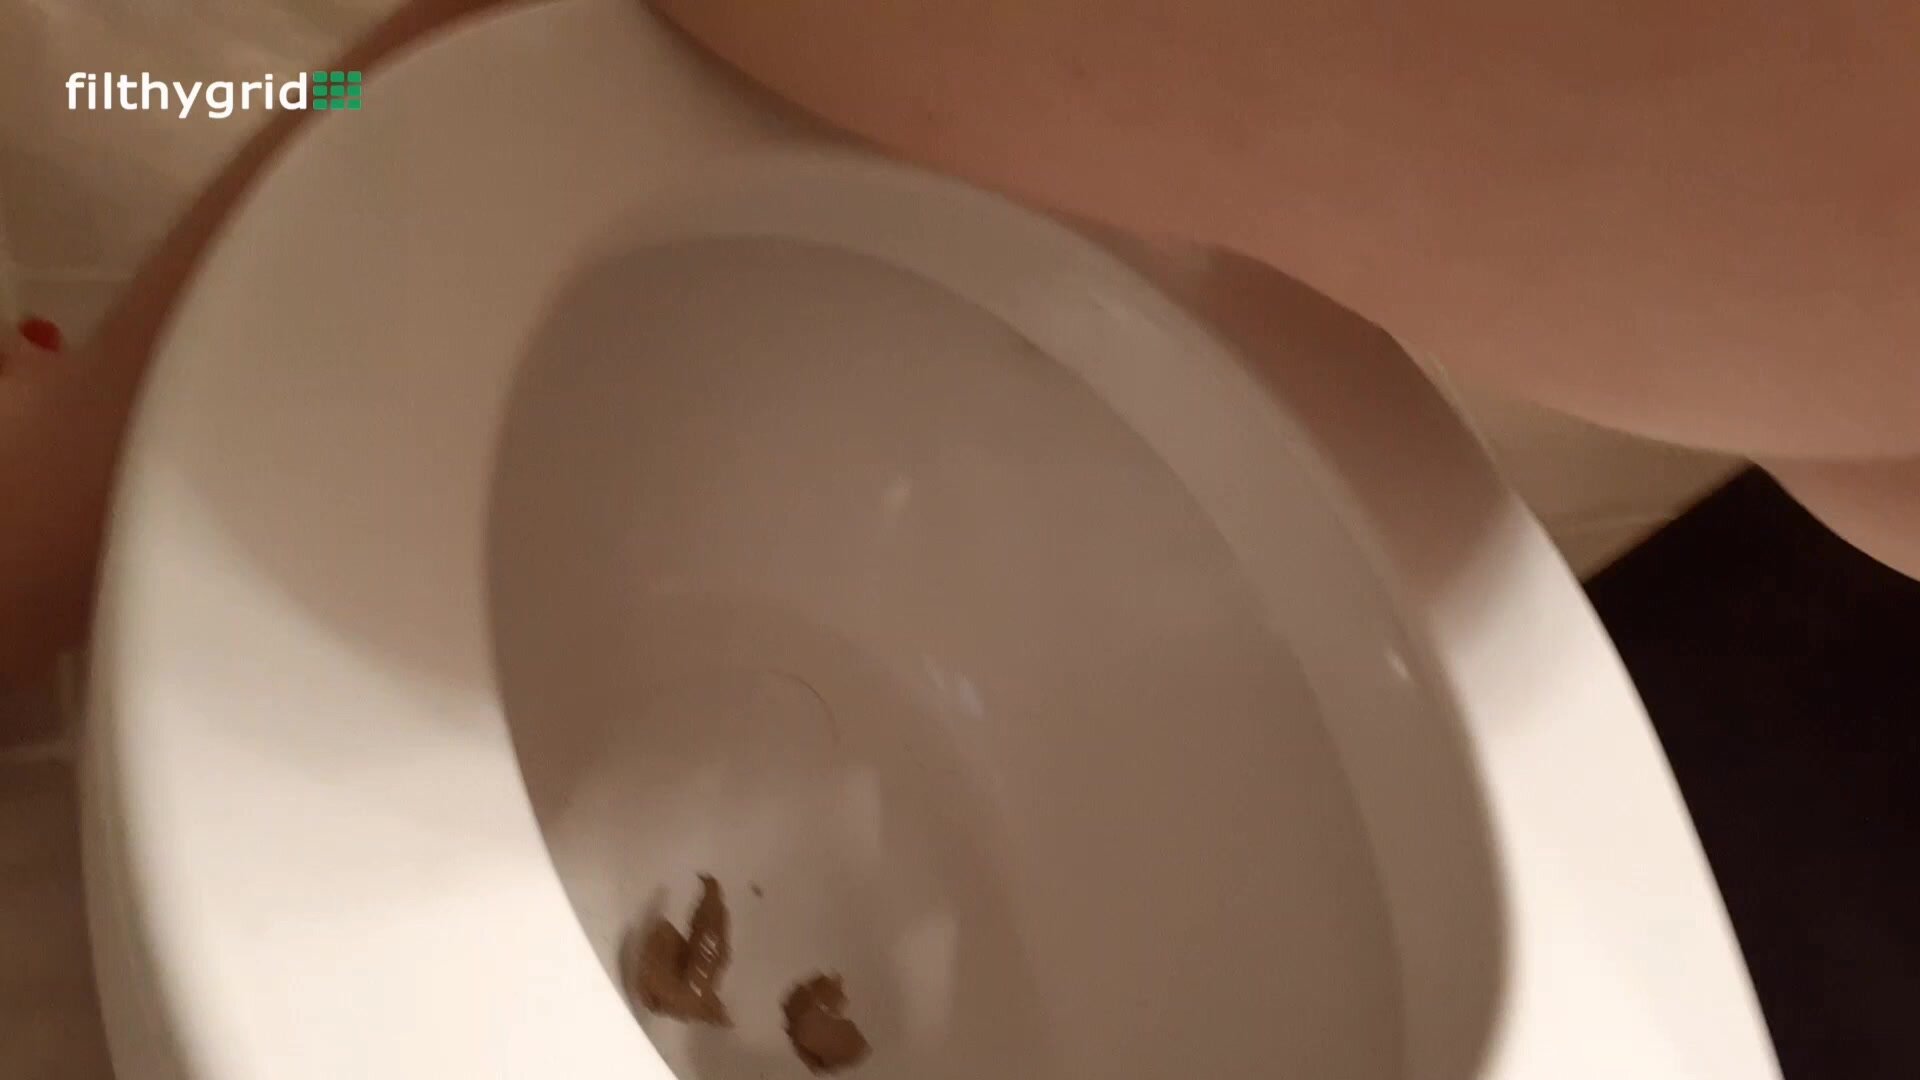 Poop on the seat